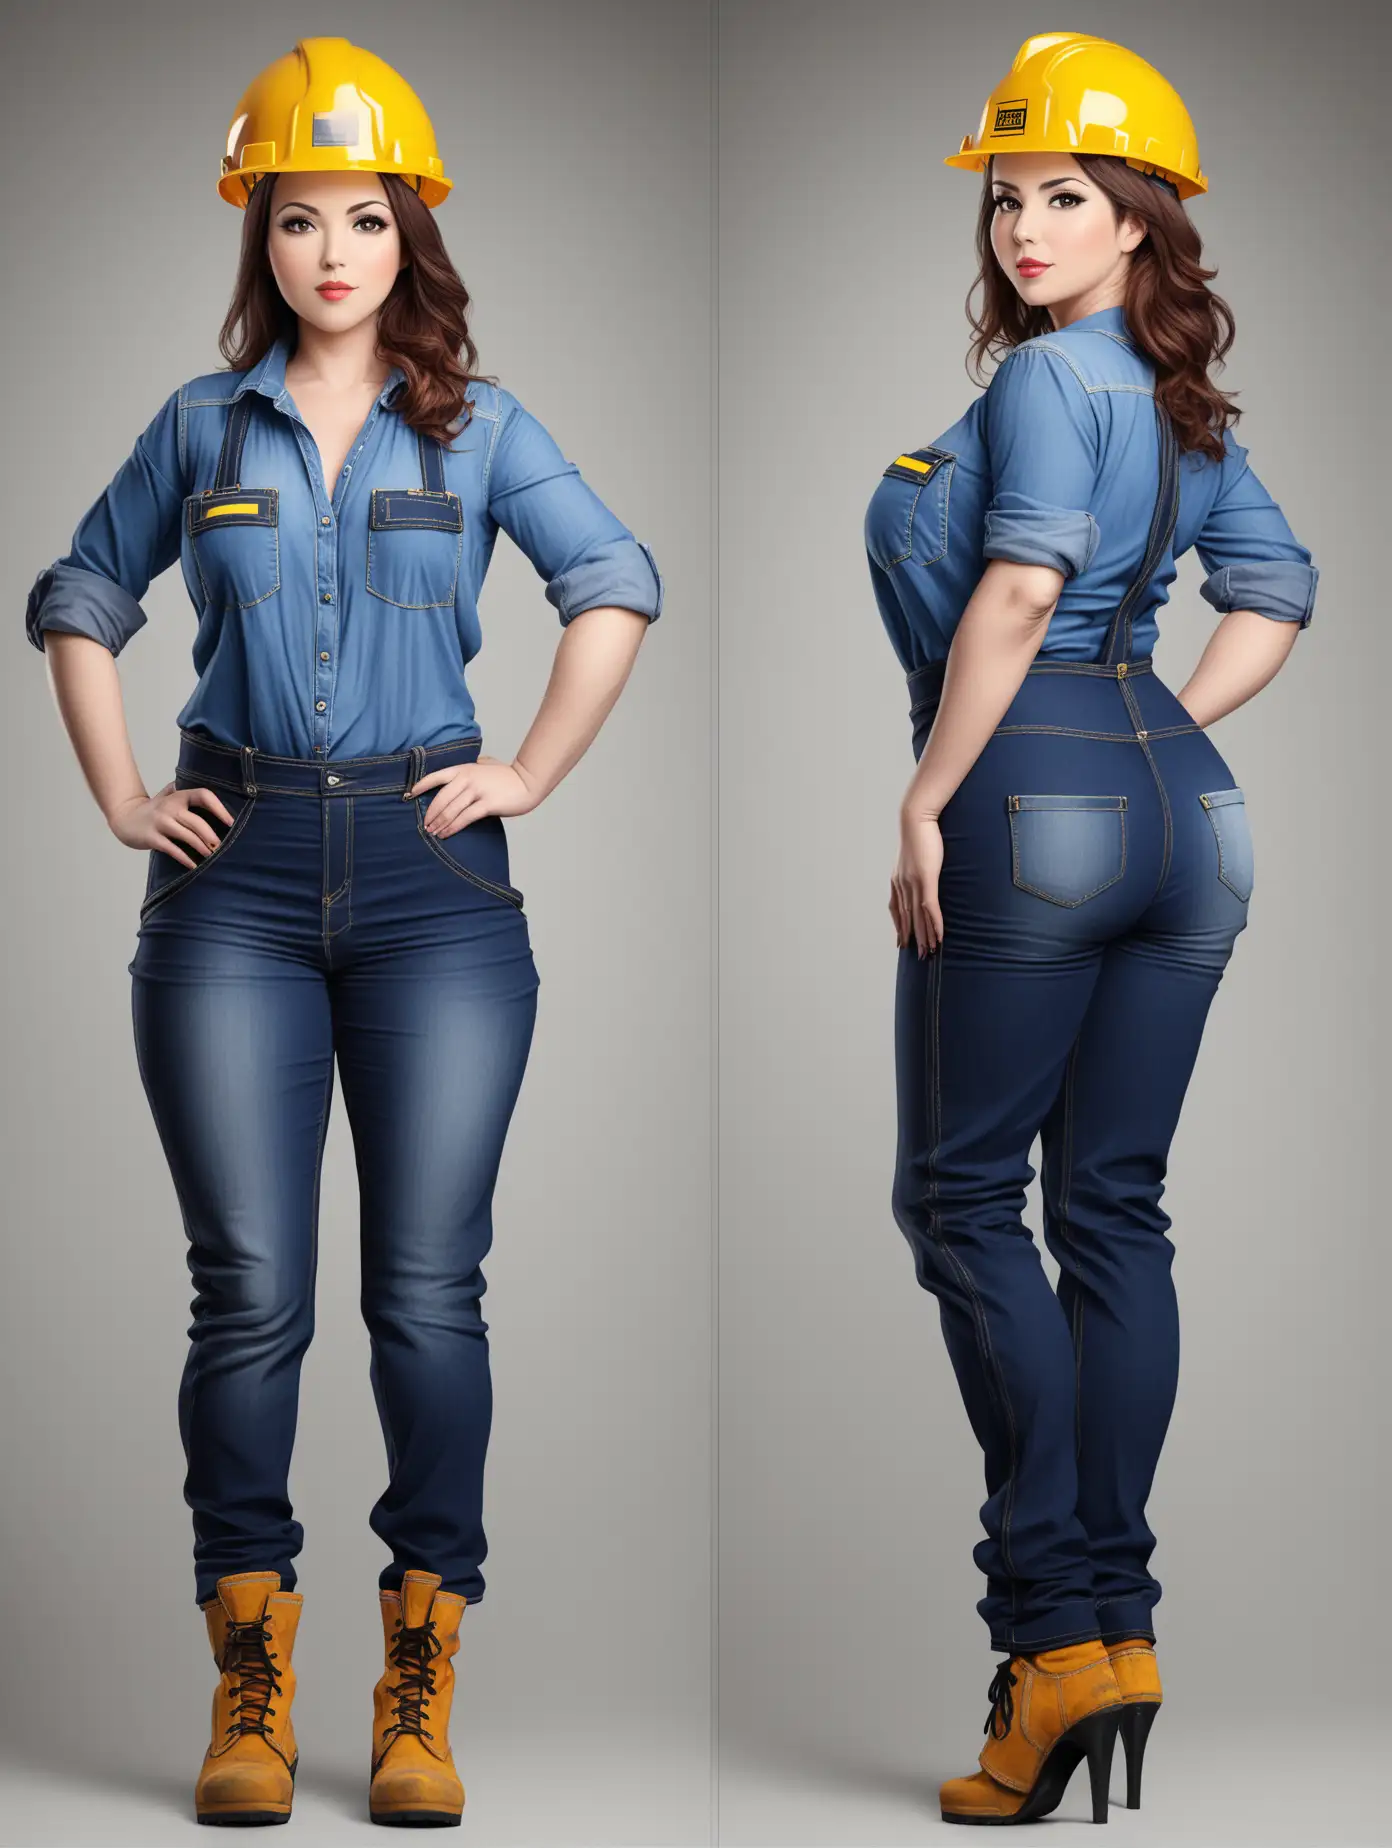 Sensual picture of a attractive woman, age 30, construction worker outfit, large butt, 2 poses, full body